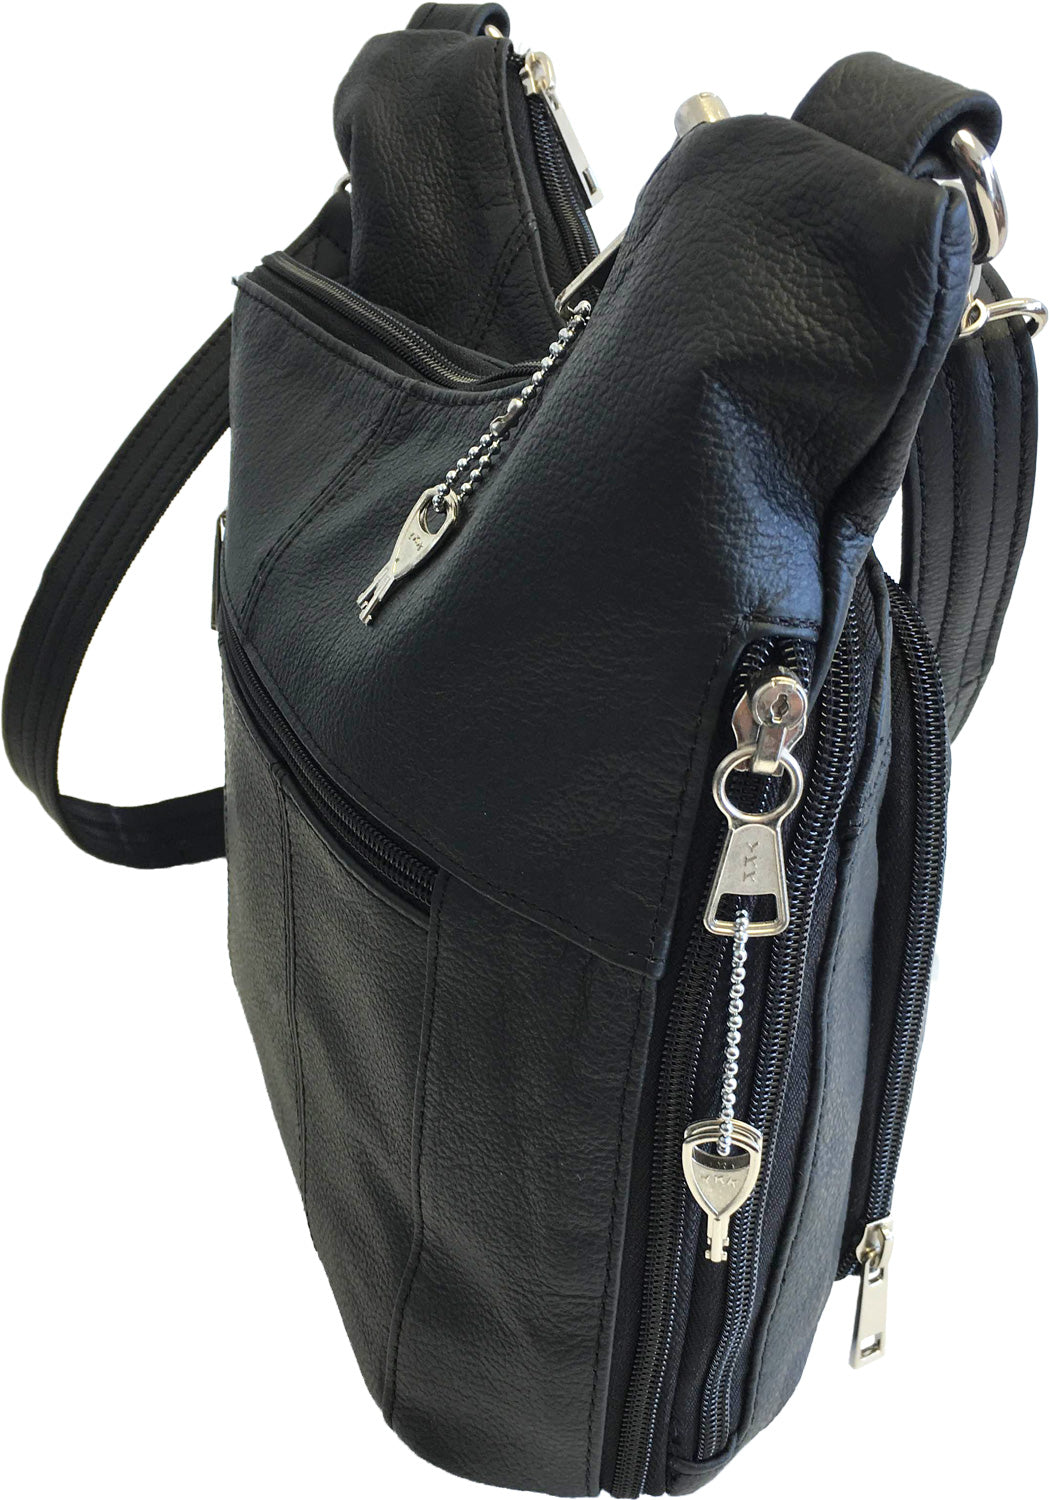 Concealed Carry Purses Bags | IQS Executive